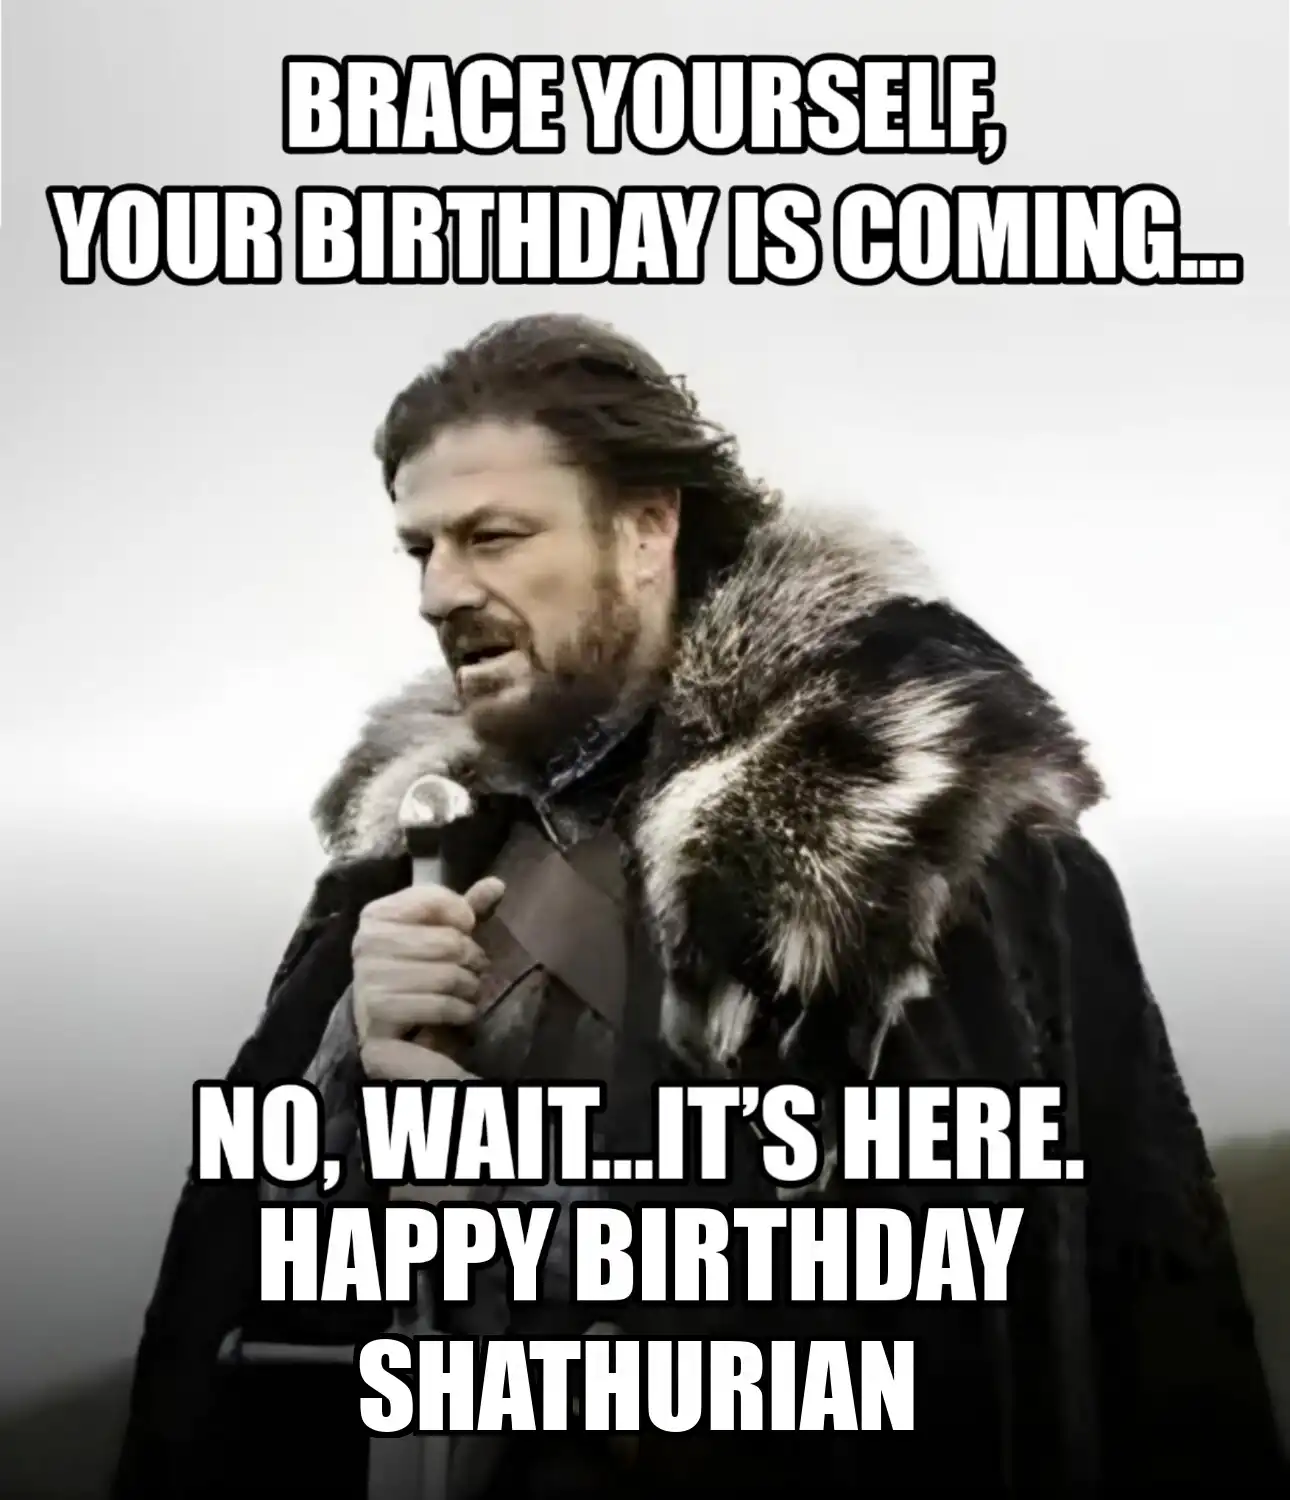 Happy Birthday Shathurian Brace Yourself Your Birthday Is Coming Meme